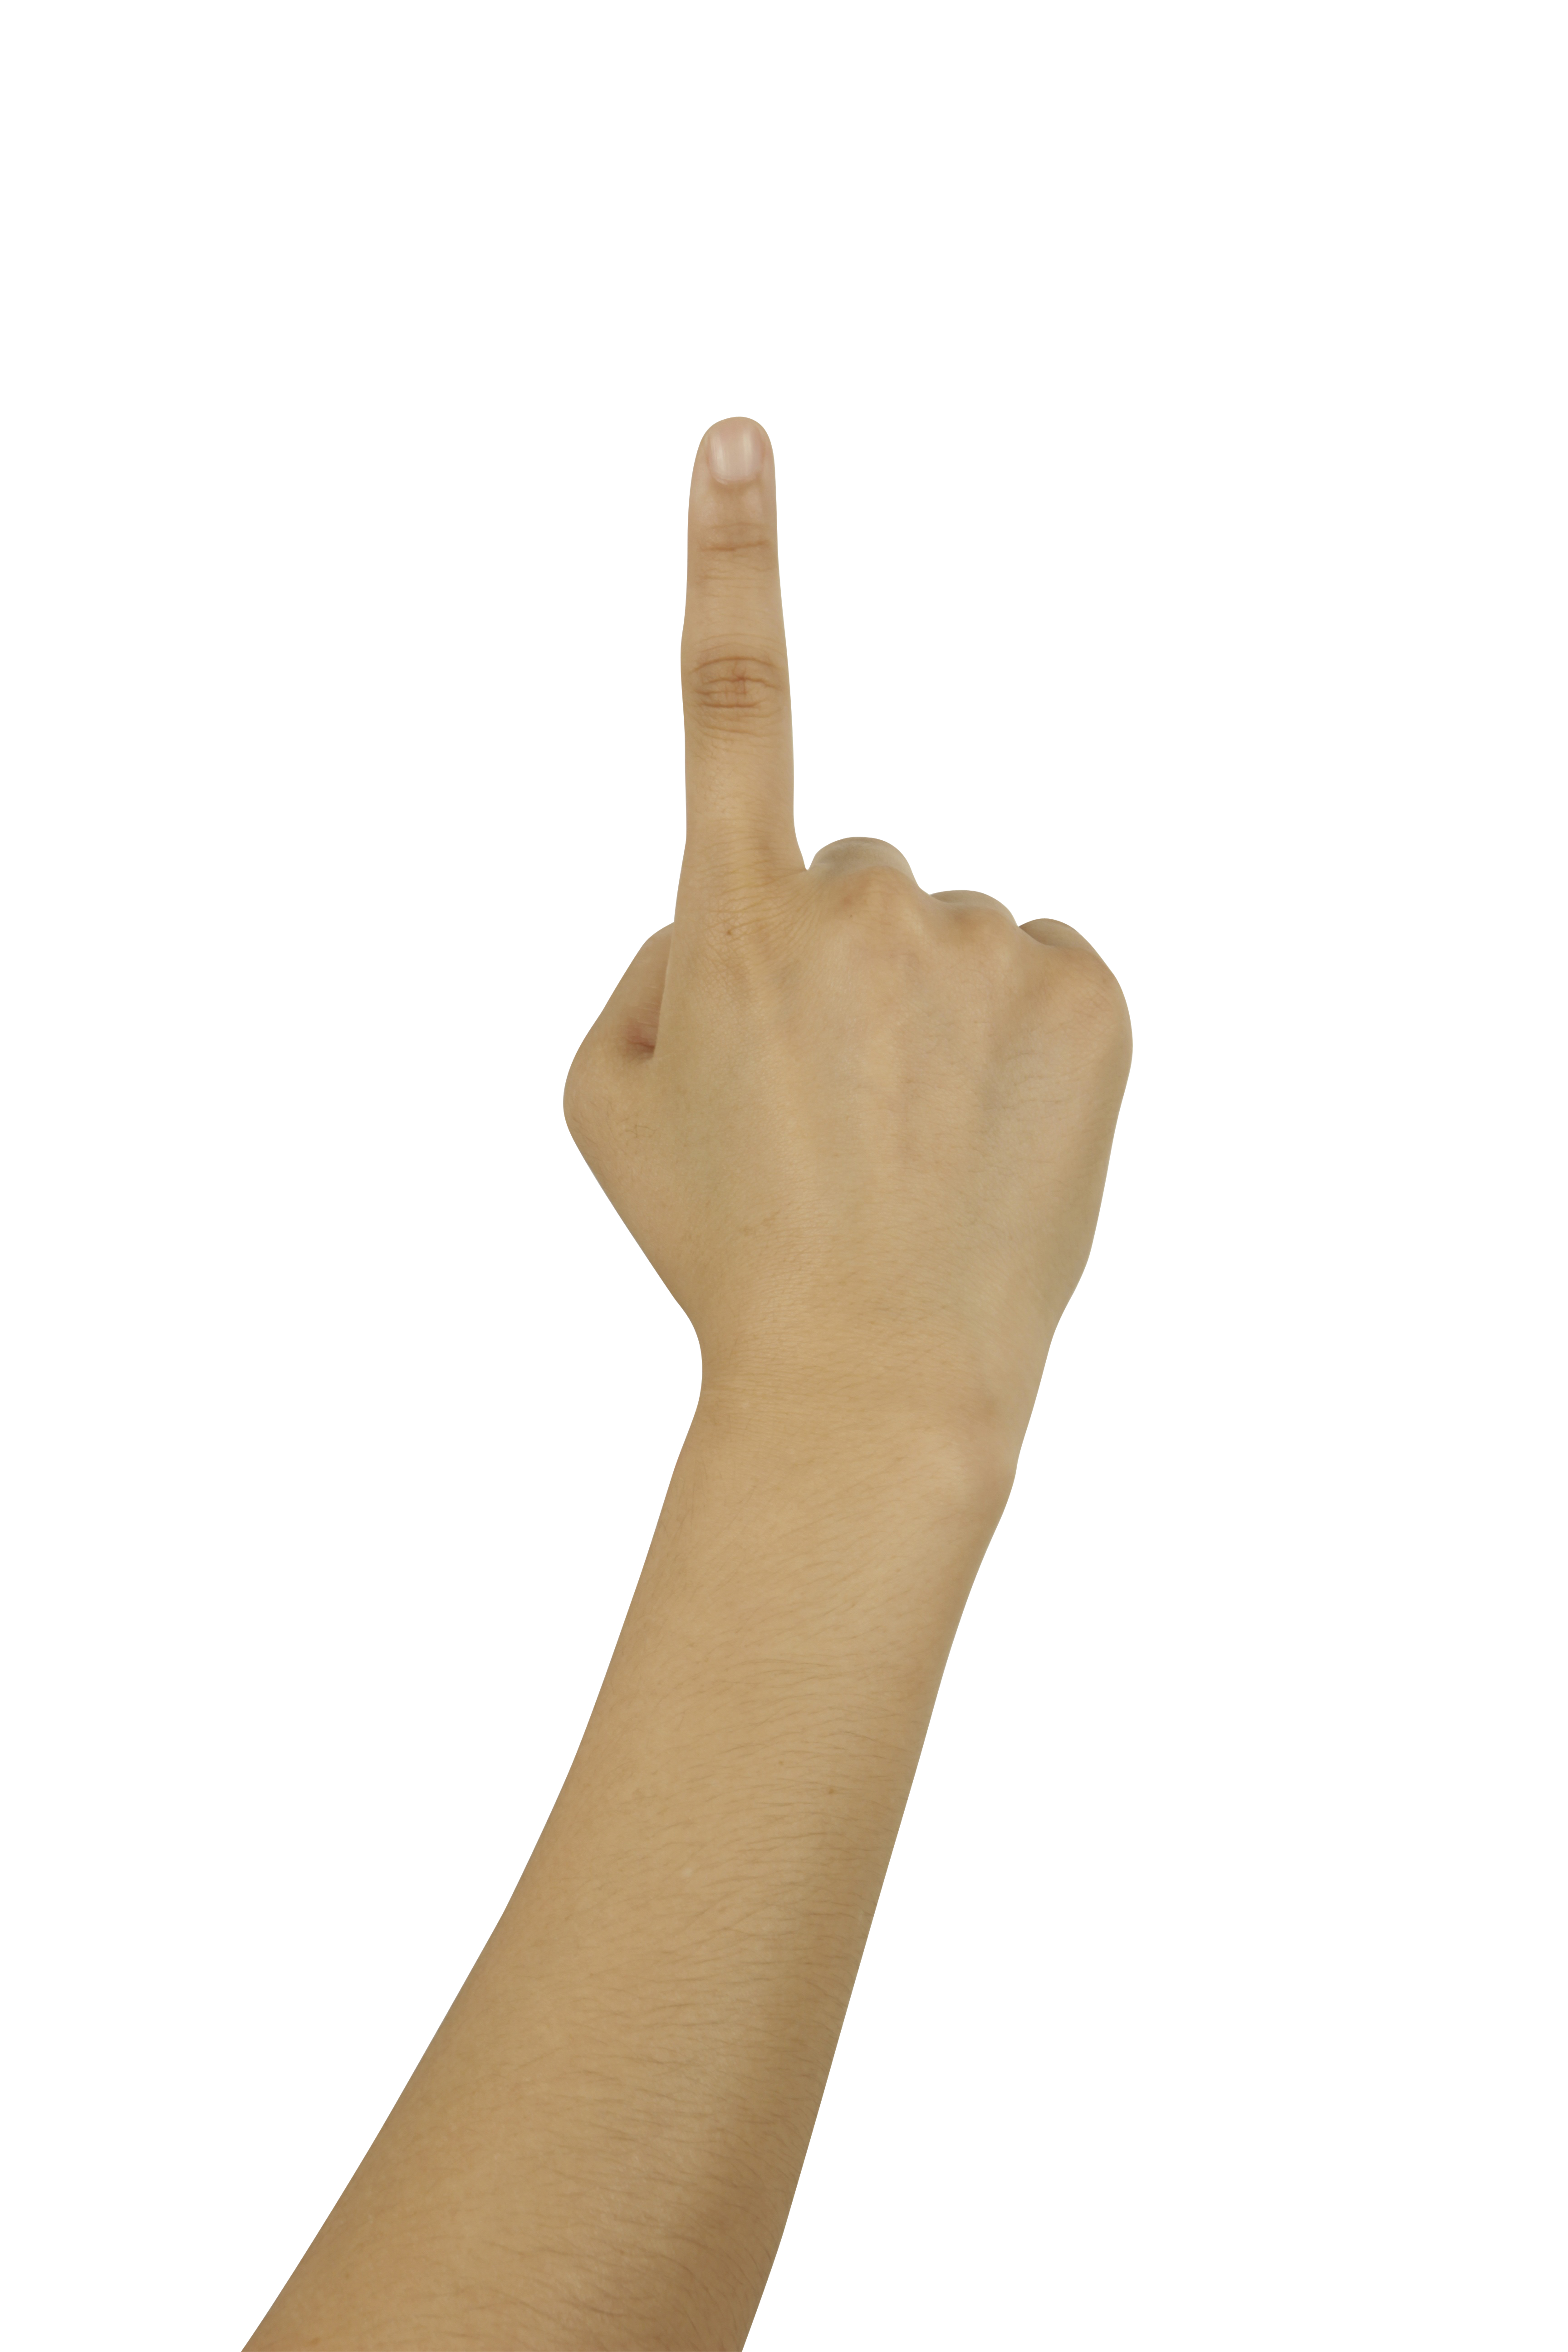 Finger Pointing Upward Png Image Purepng Free Transparent Cc0 Png Image Library